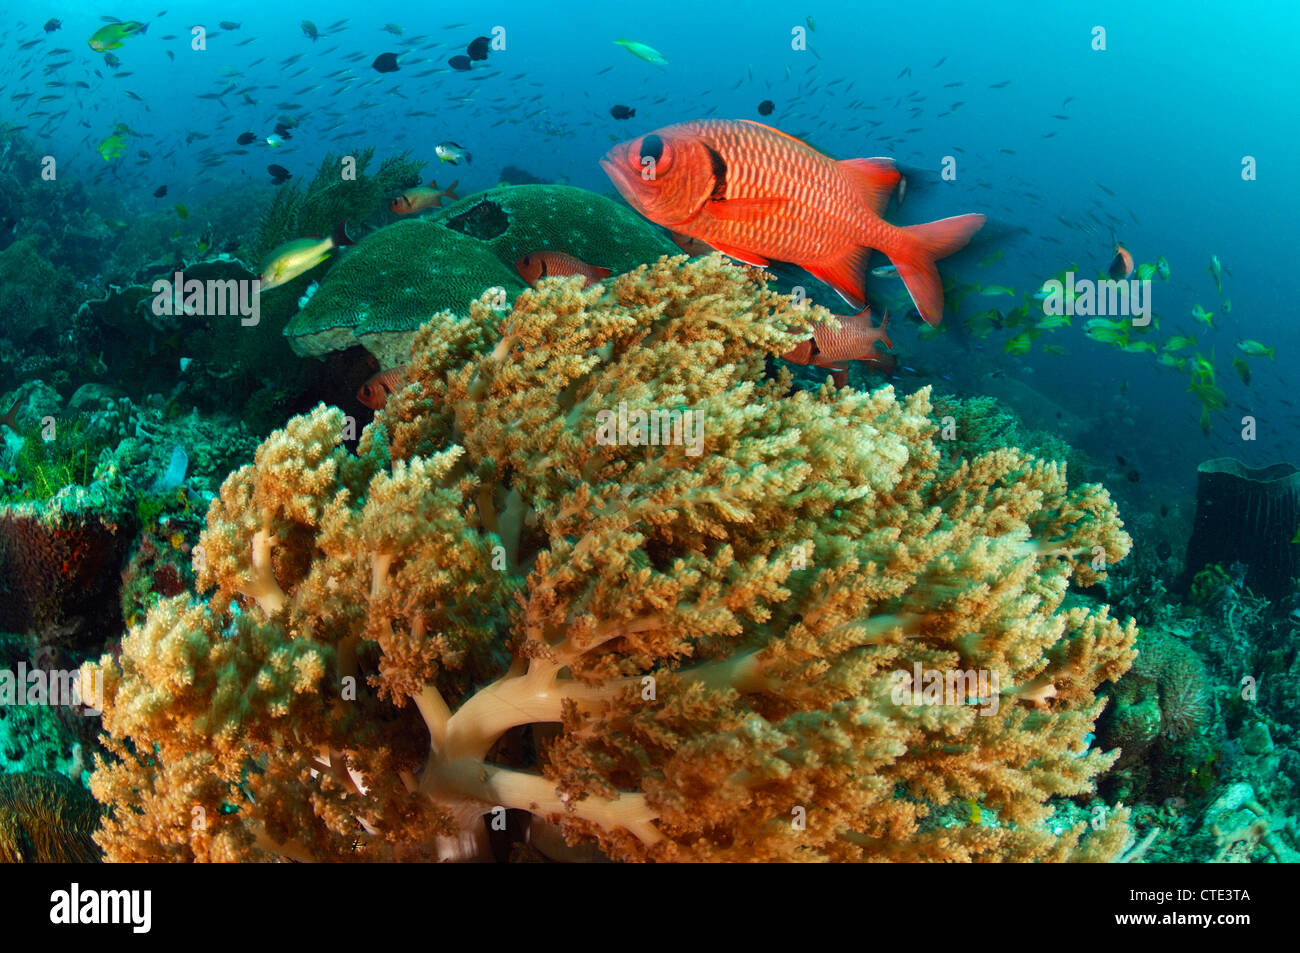 Soldierfish over Coral Reerf, Myripristis sp., Cannibal Rock, Rinca, Indonesia Stock Photo